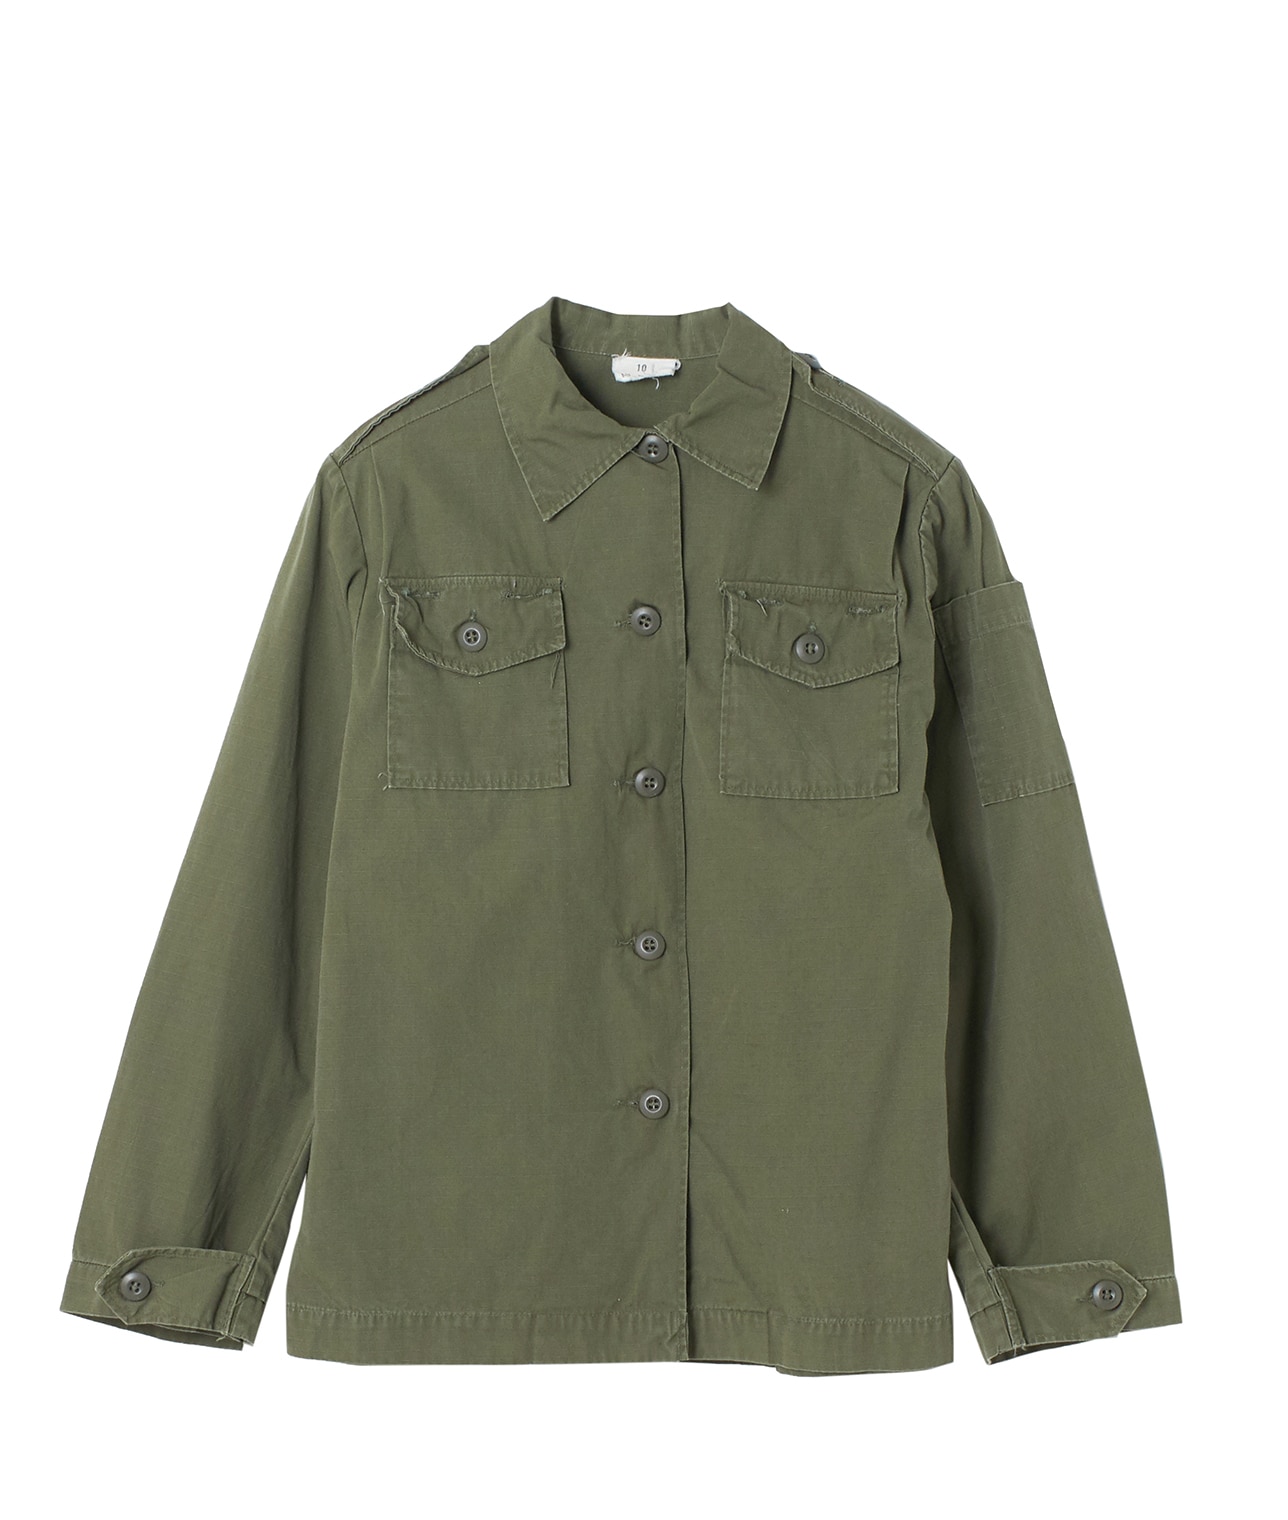 USED/74 US ARMED FORCES WOMAN'S UTILITY SHIRT 詳細画像 オリーブグリーン 1